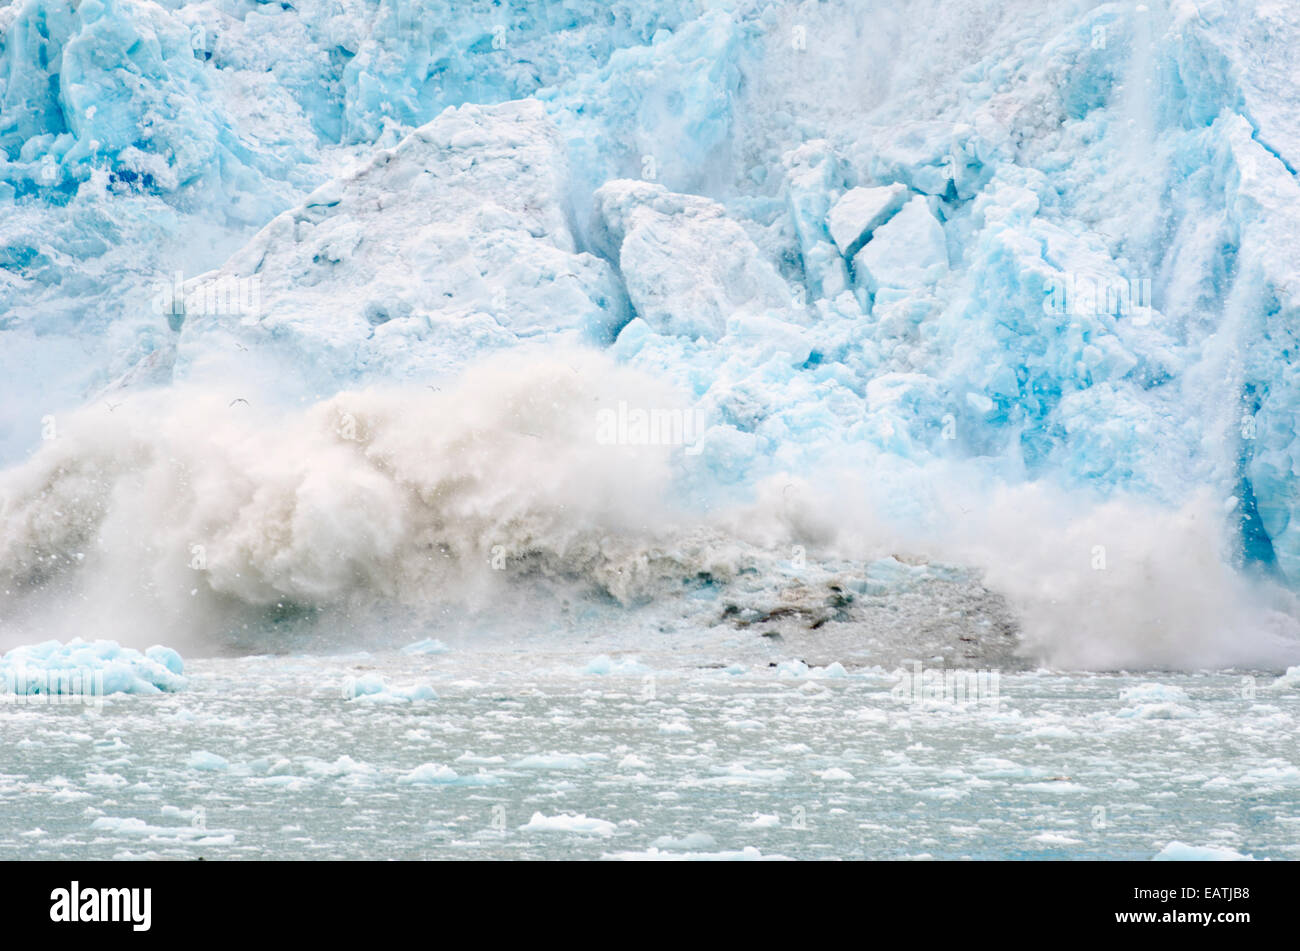 A massive calving of ice into the ocean from Lillienhookbreen glacier. Stock Photo